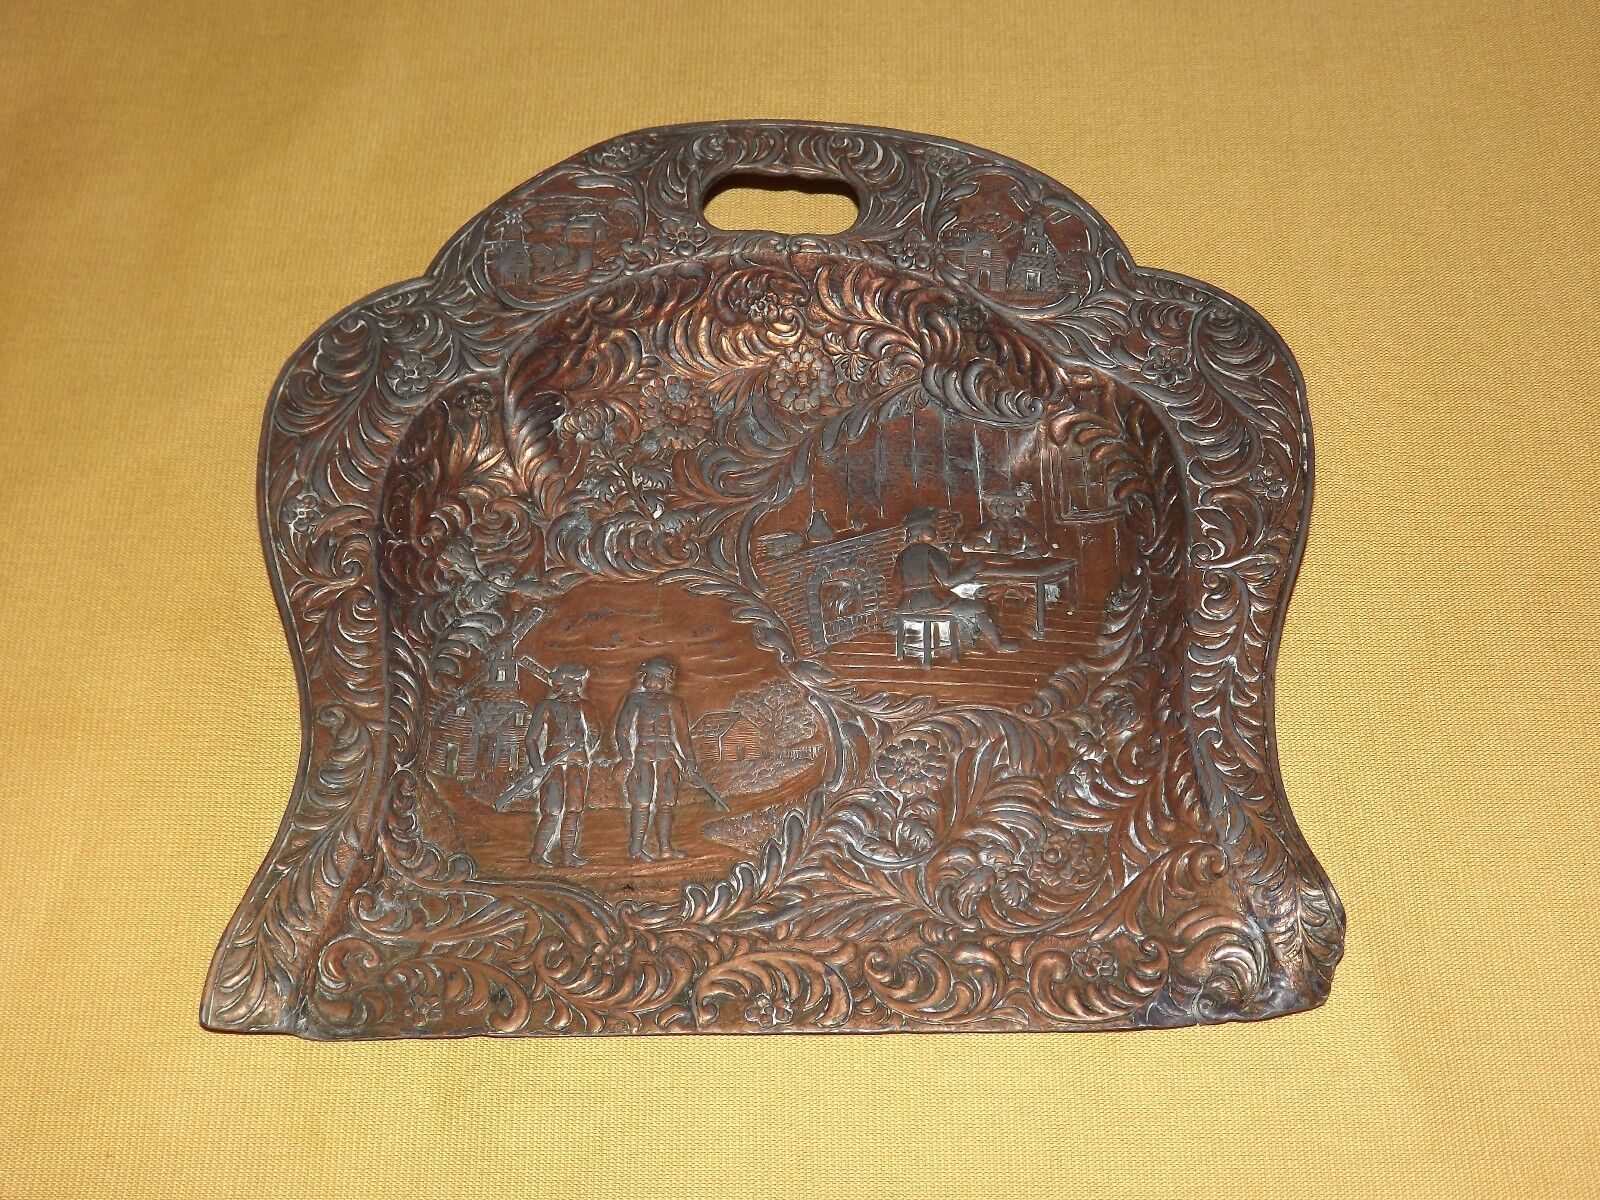 VINTAGE DECORATIVE COPPER TABLE BUTLER CRUMBER CRUMB TRAY